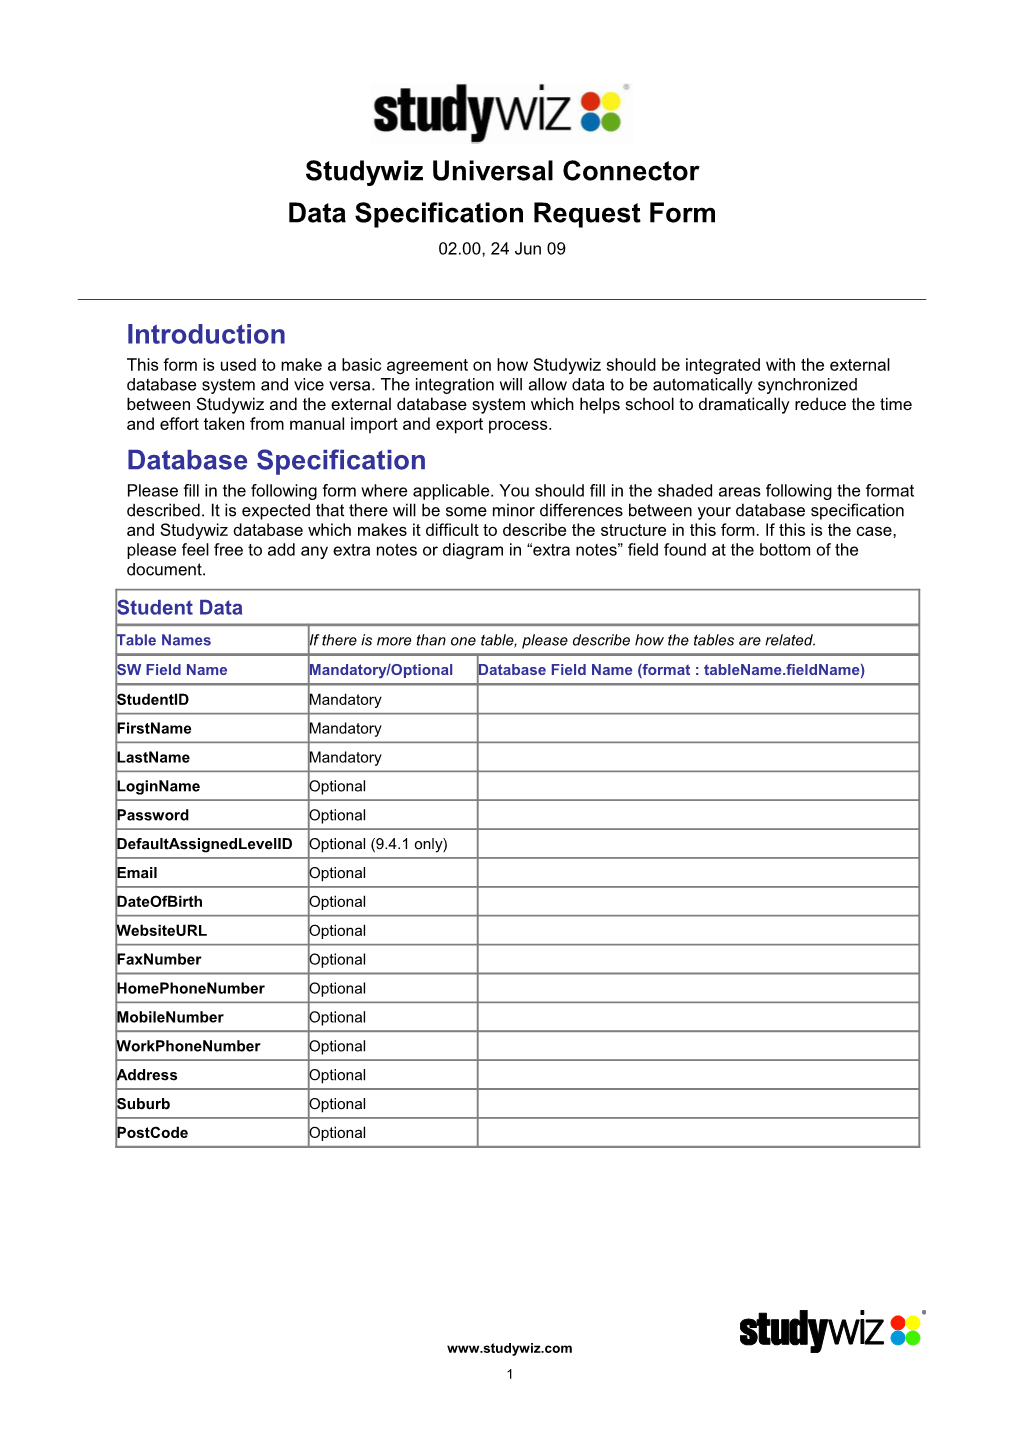 Data Specification Request Form